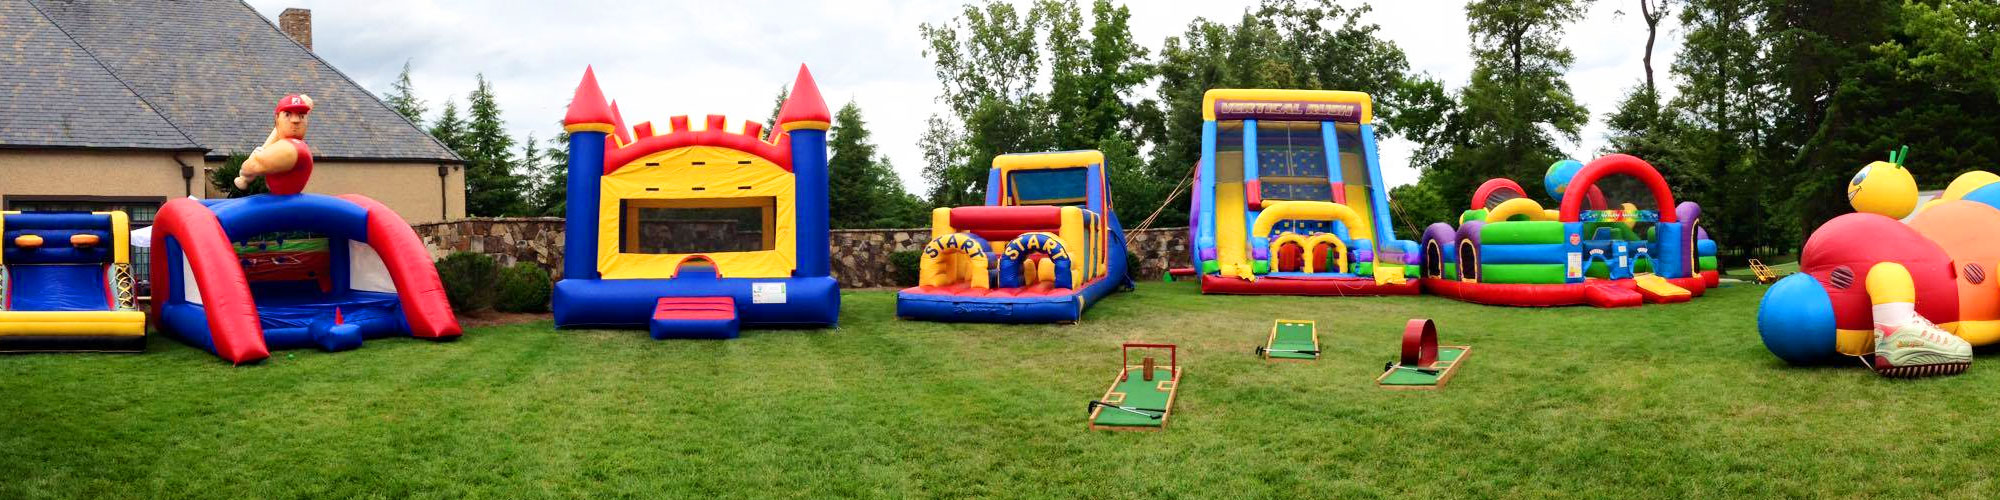 Which Is The Best Party Rentals In Long Island Service? thumbnail